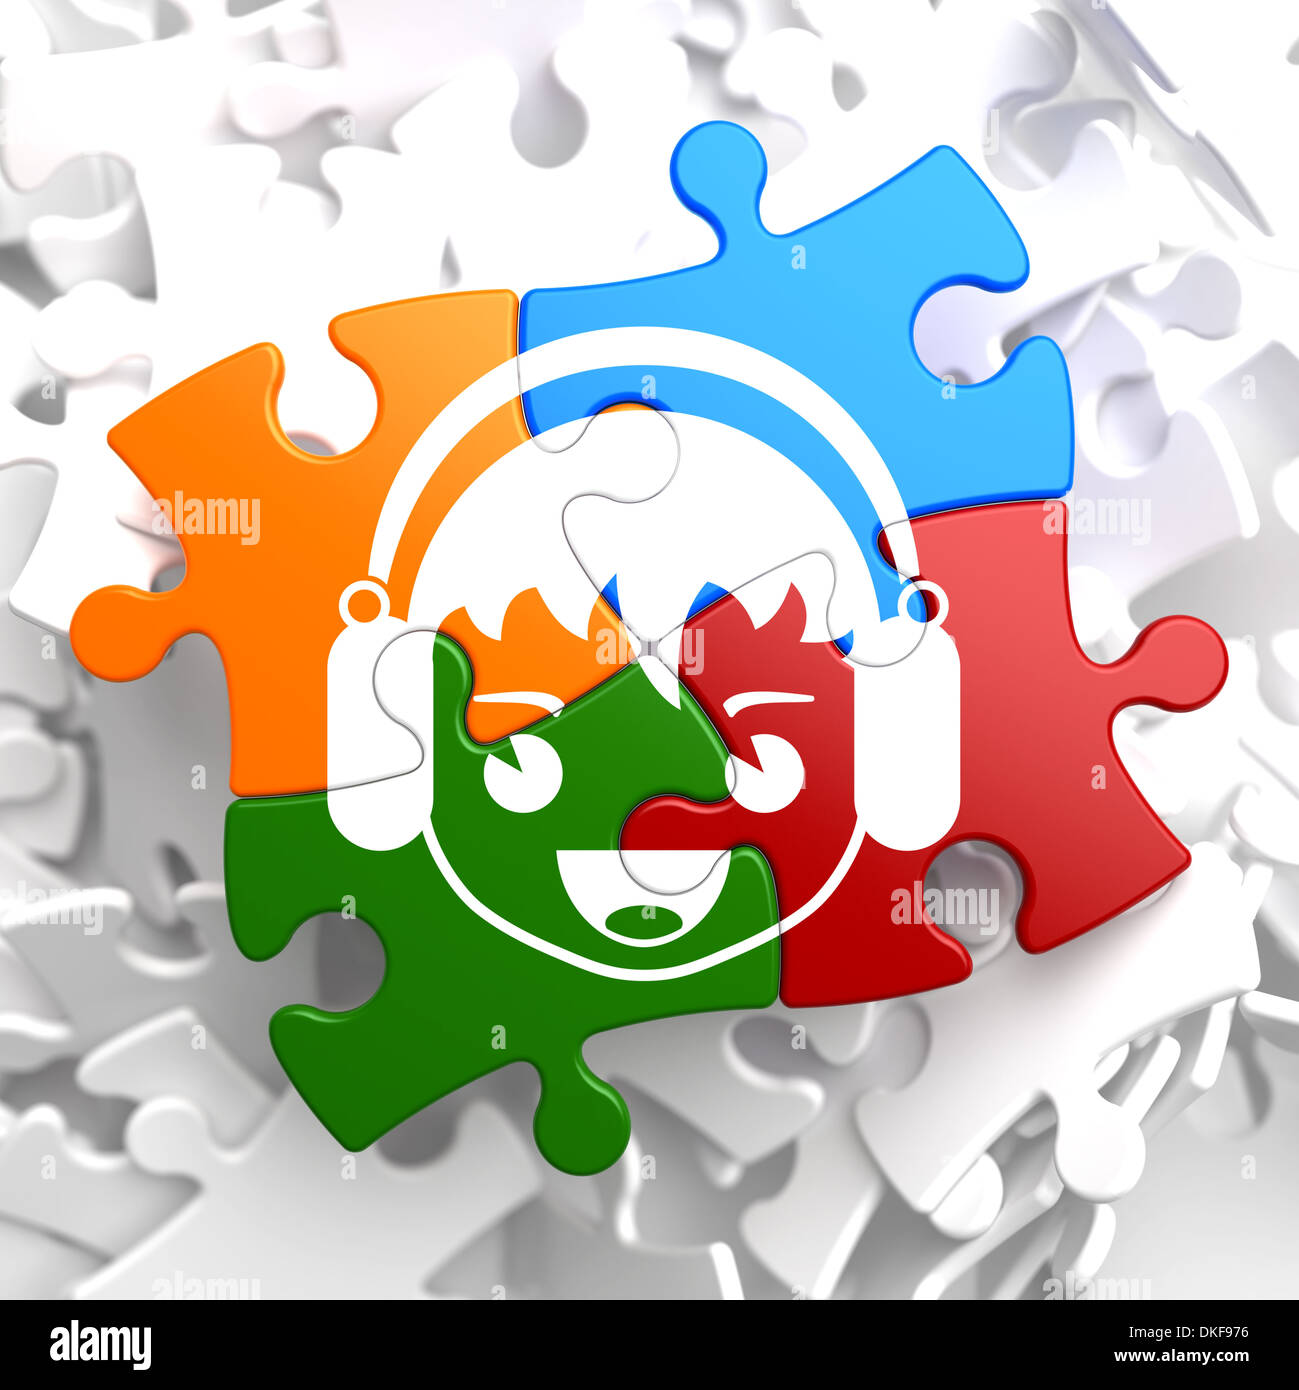 Boy with Headphones Icon on Multicolor Puzzle. Stock Photo